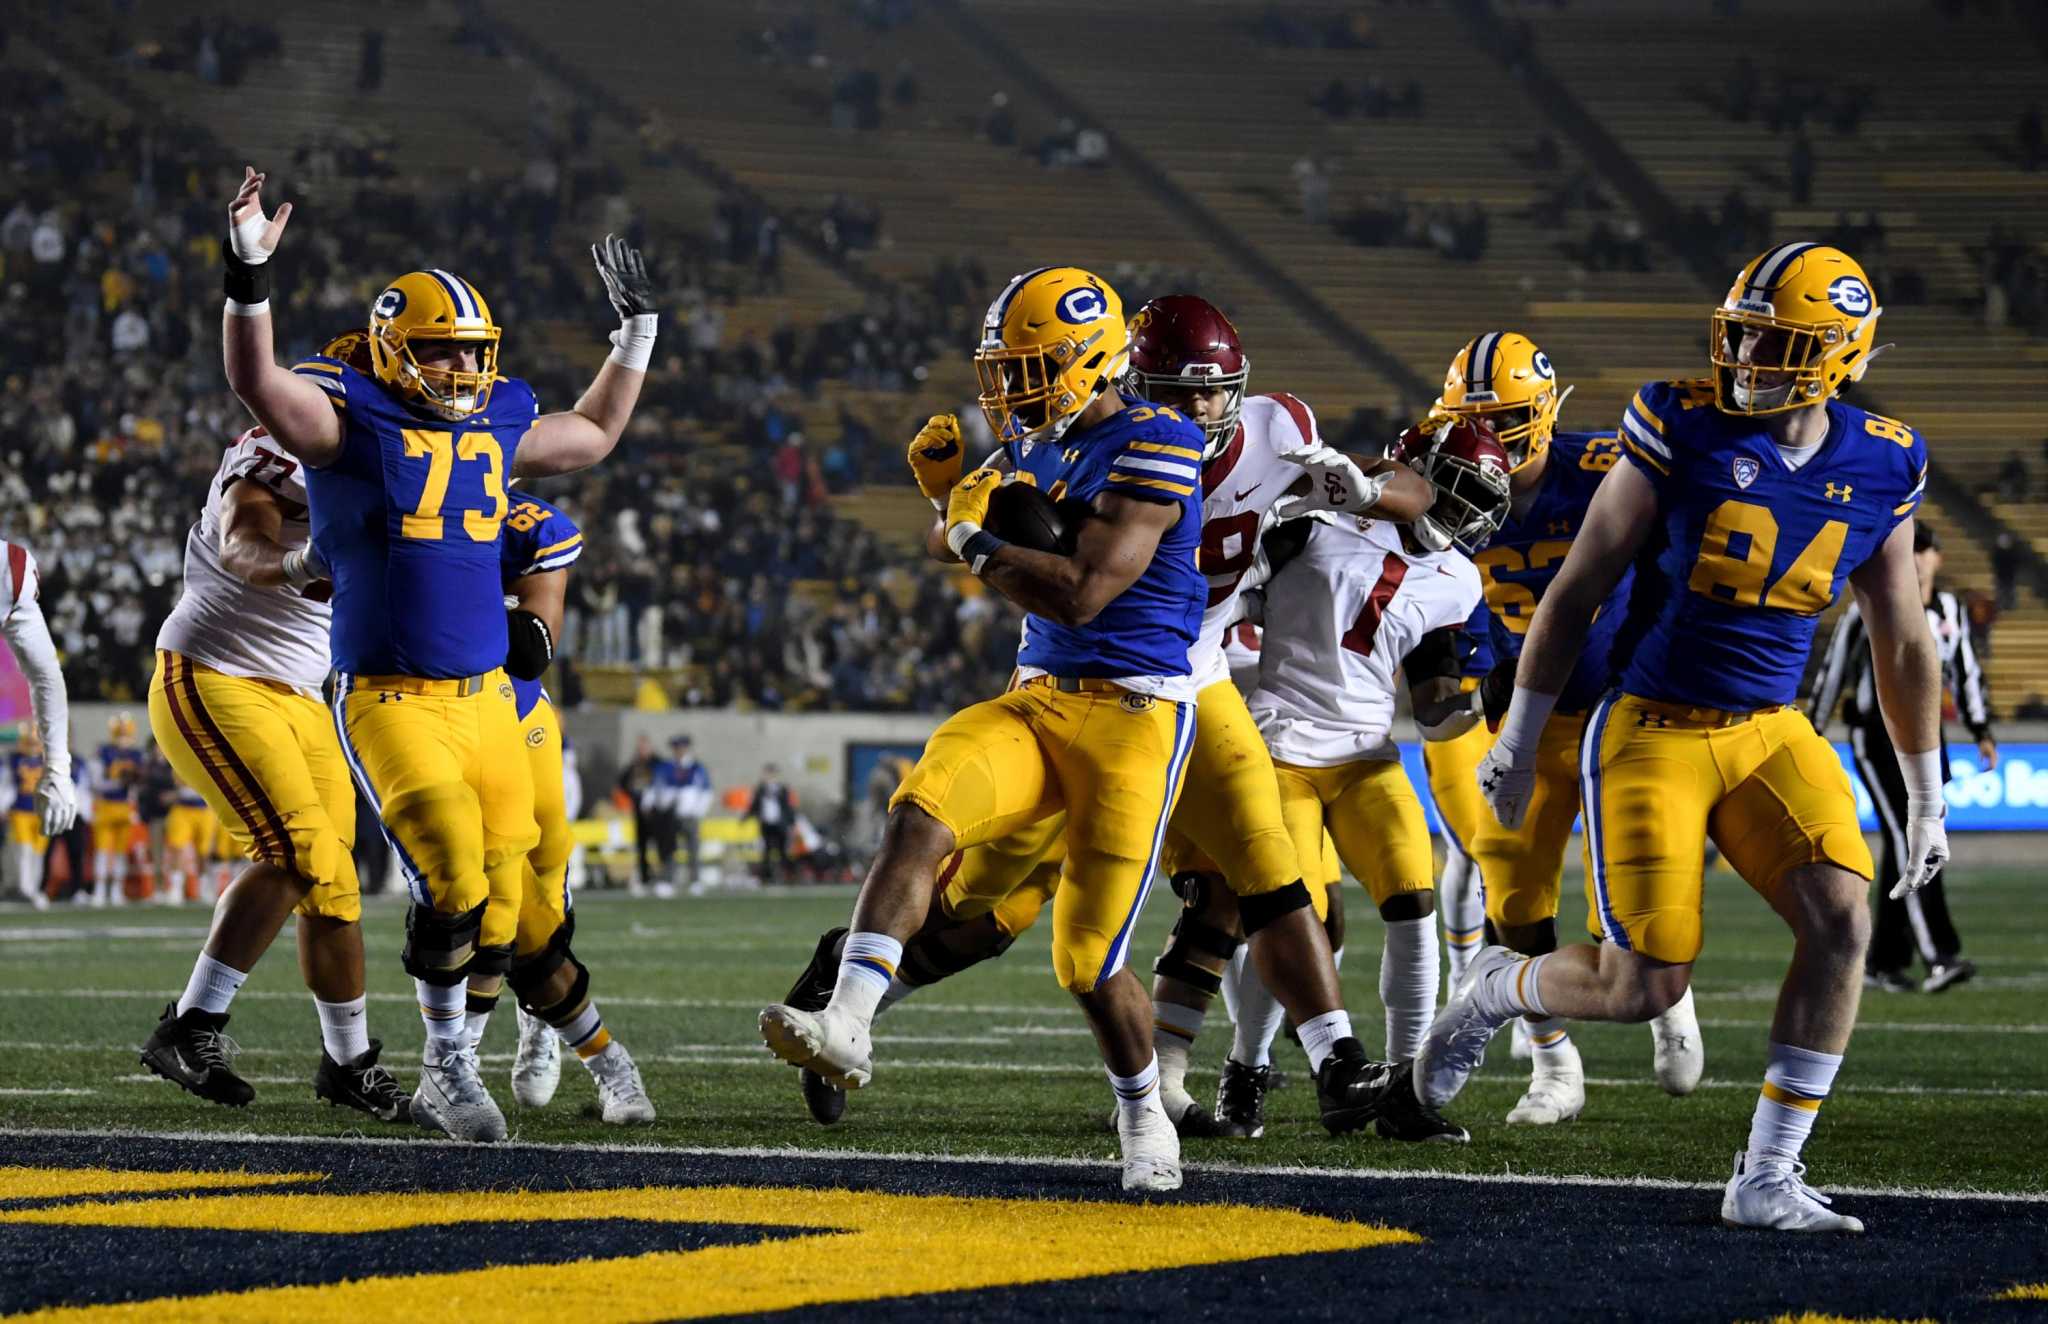 After seasonending win over USC, what’s next for Cal football?